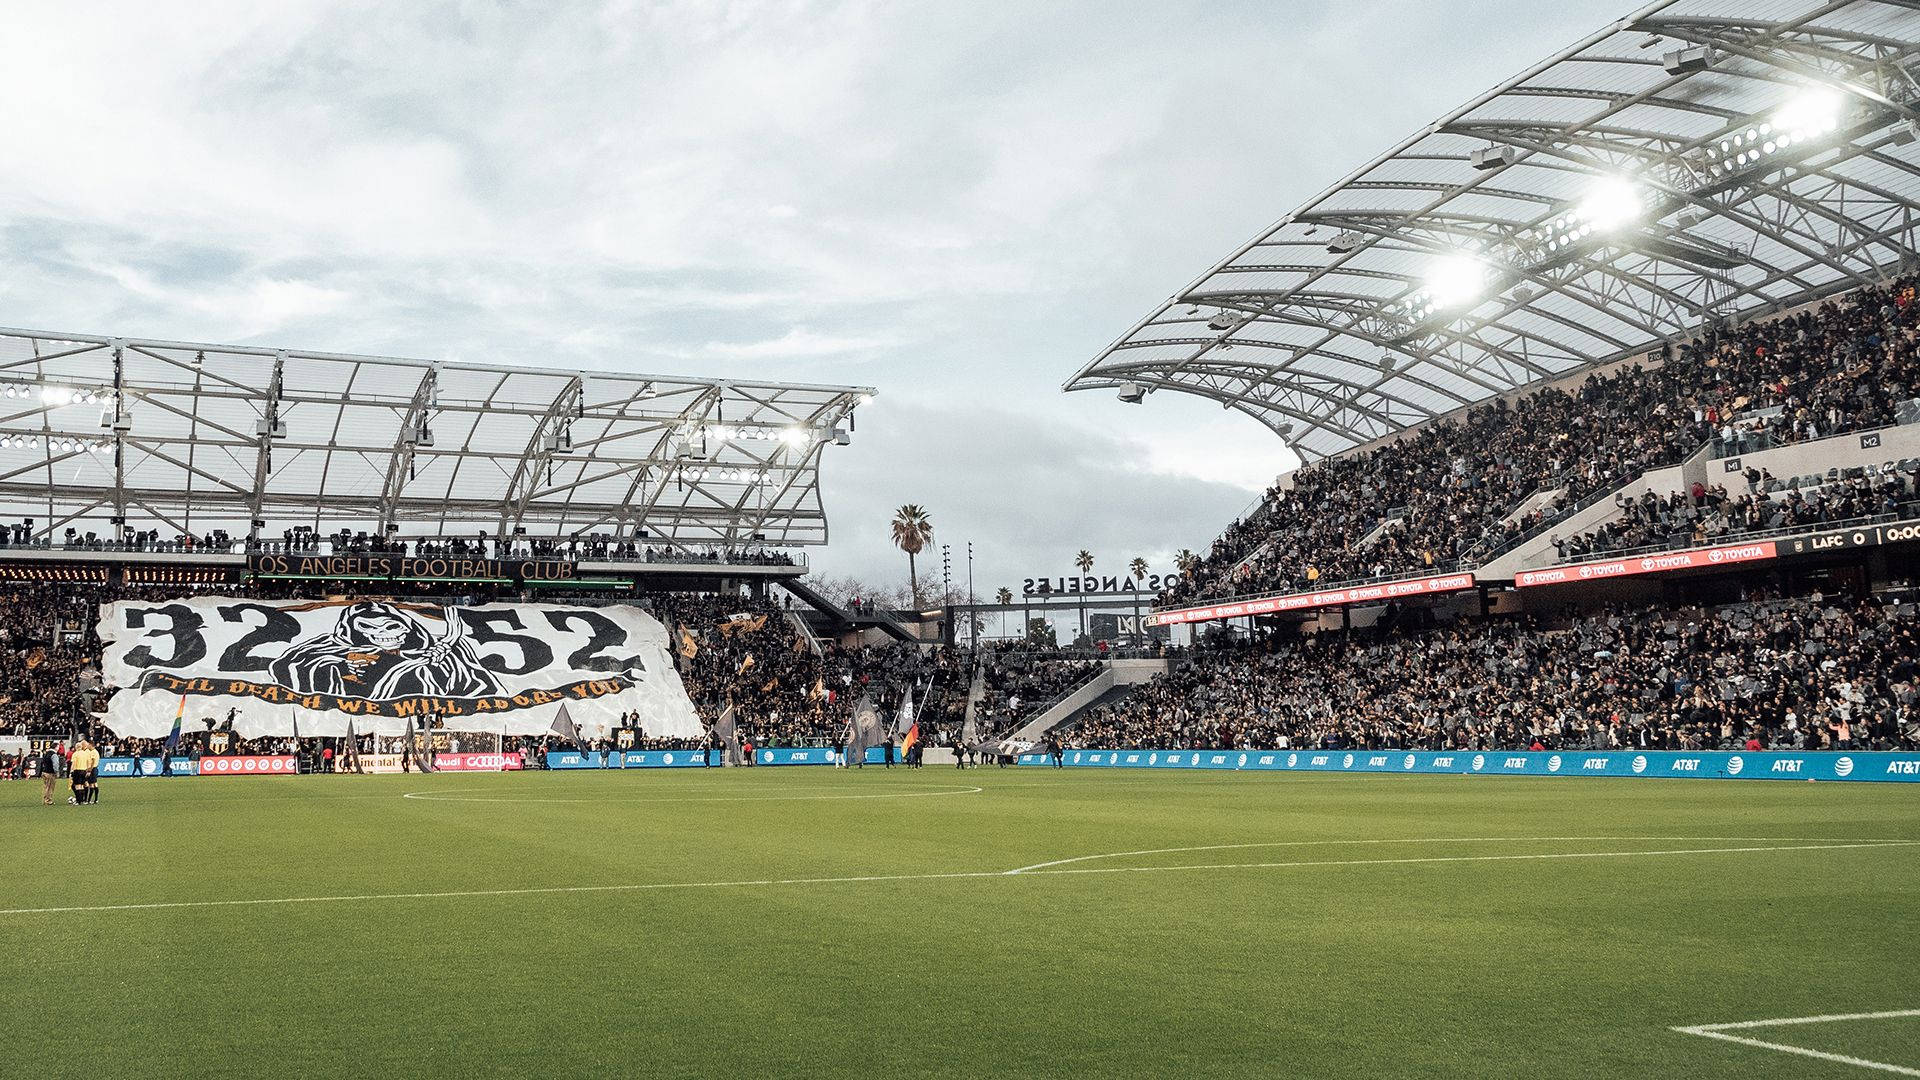 Lafc Crowds Gathered At Stadium Picture